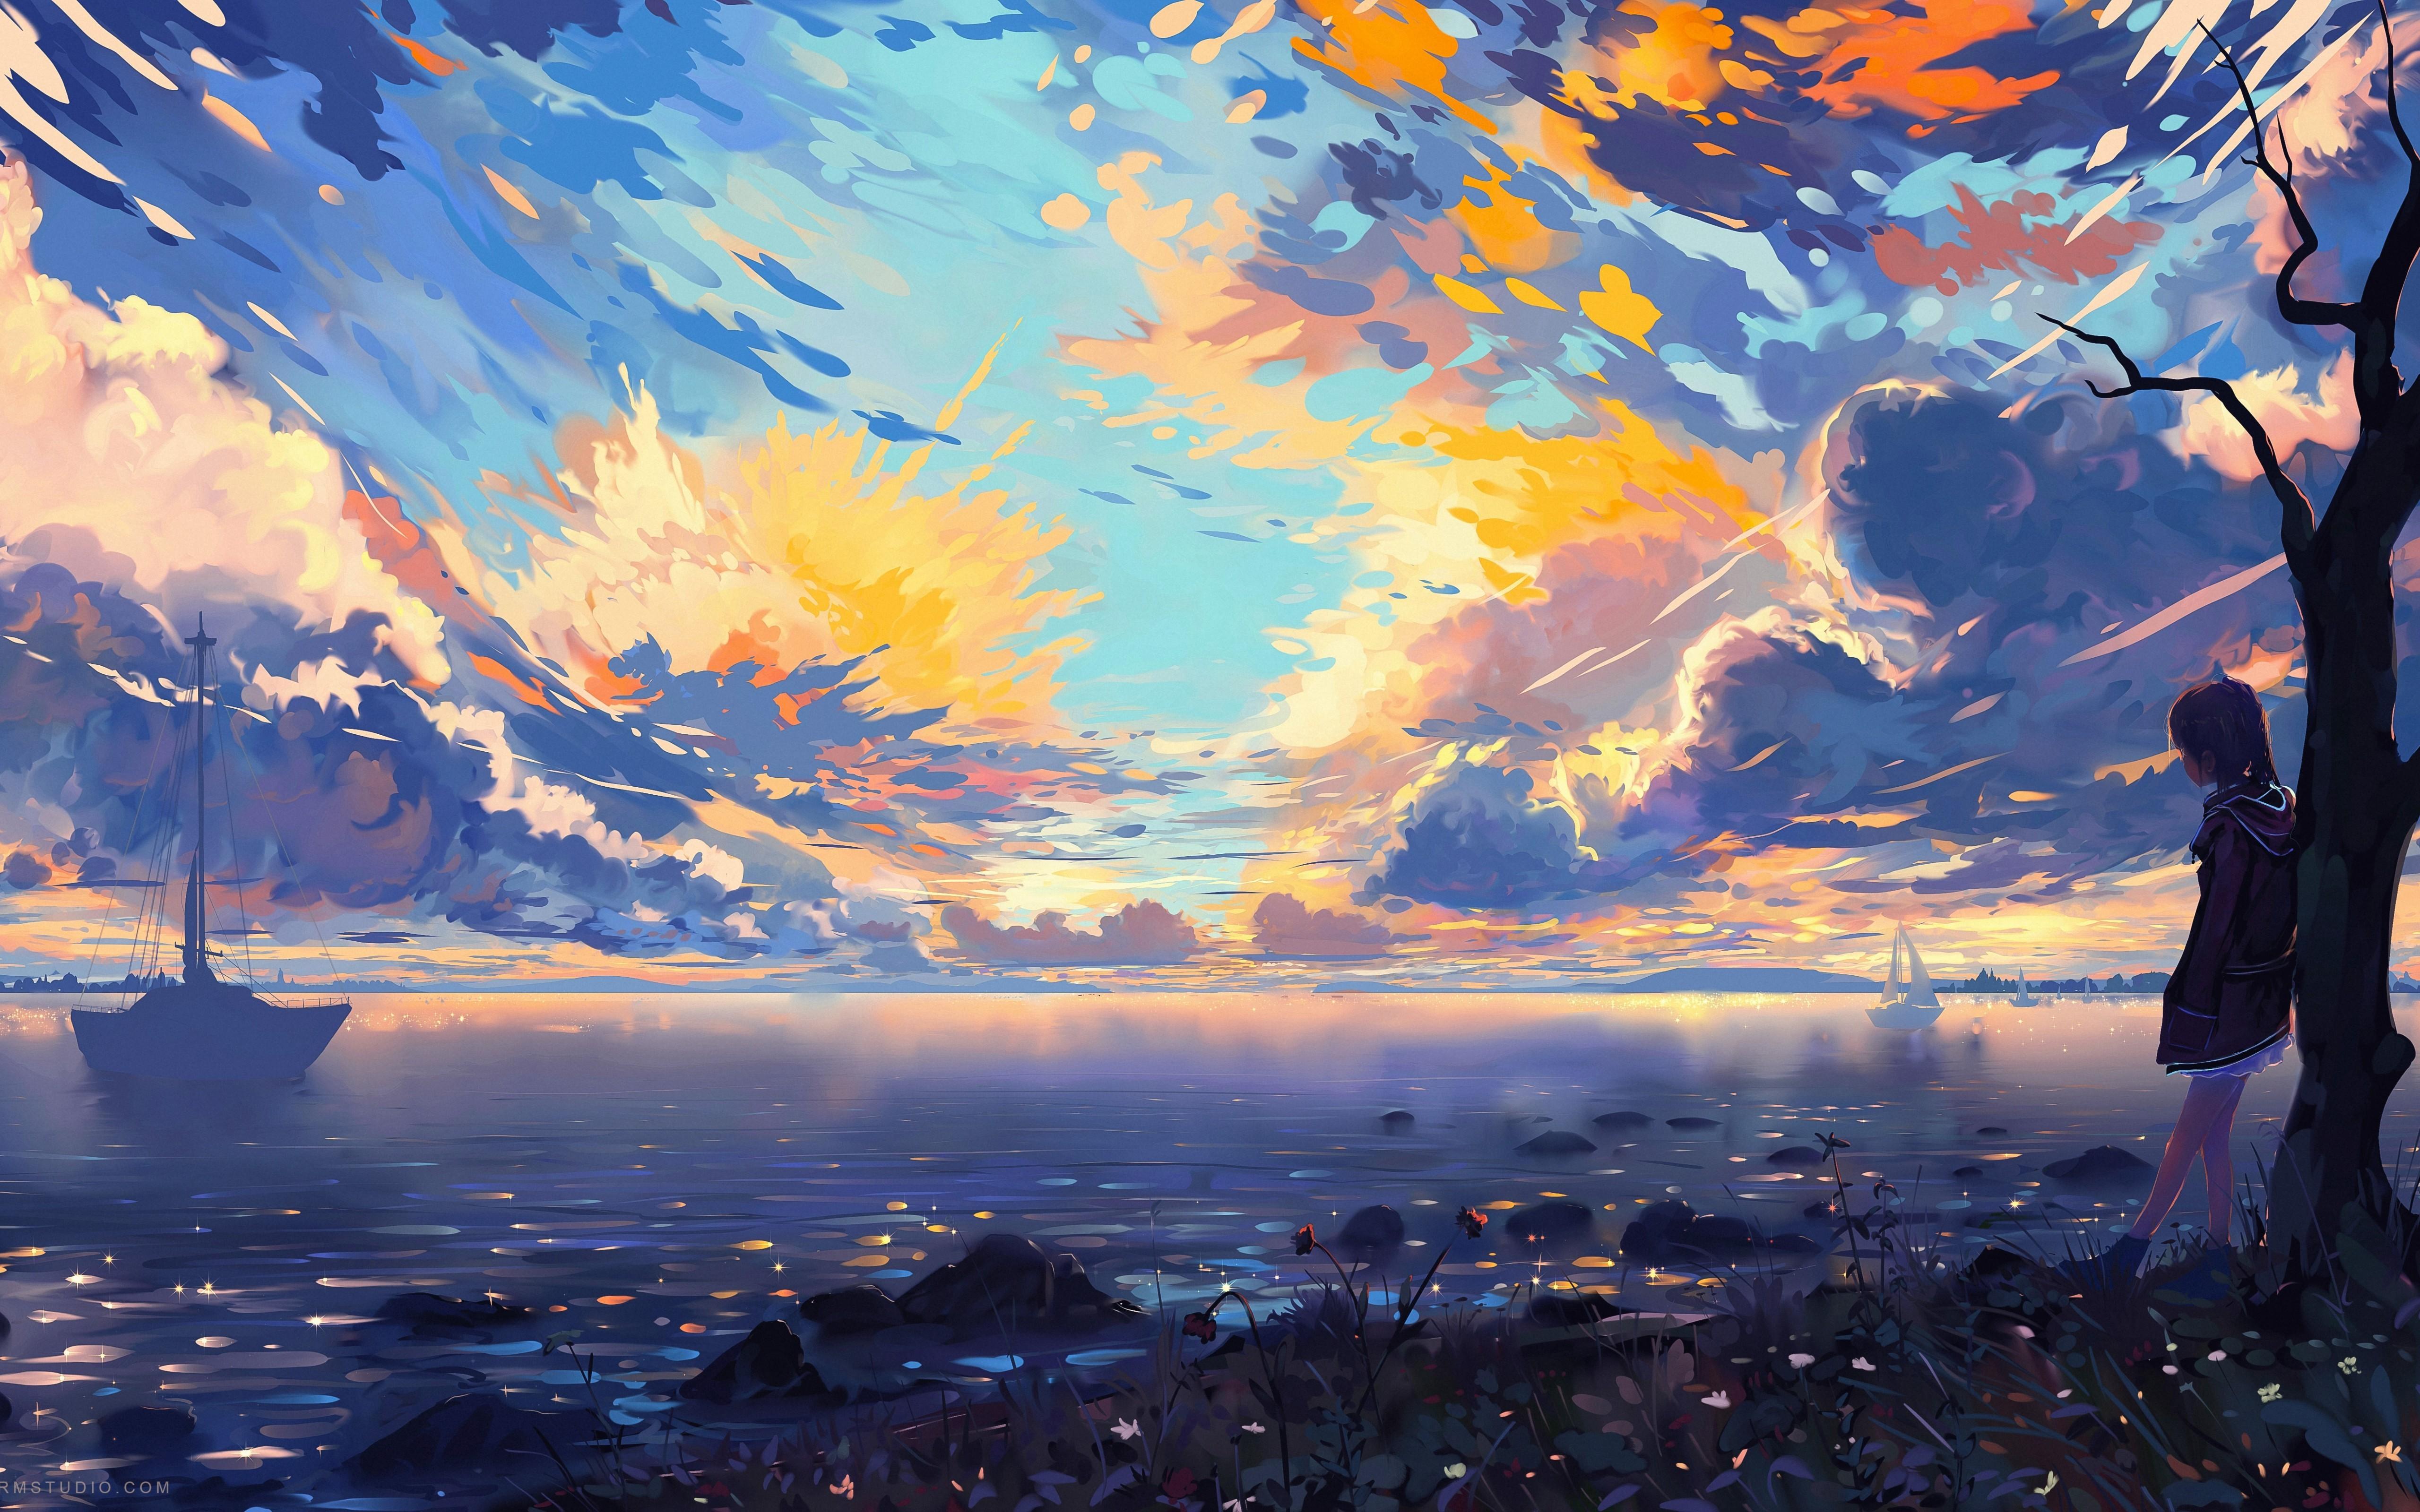 Download 5120x3200 Anime Landscape, Sea, Ships, Colorful, Clouds